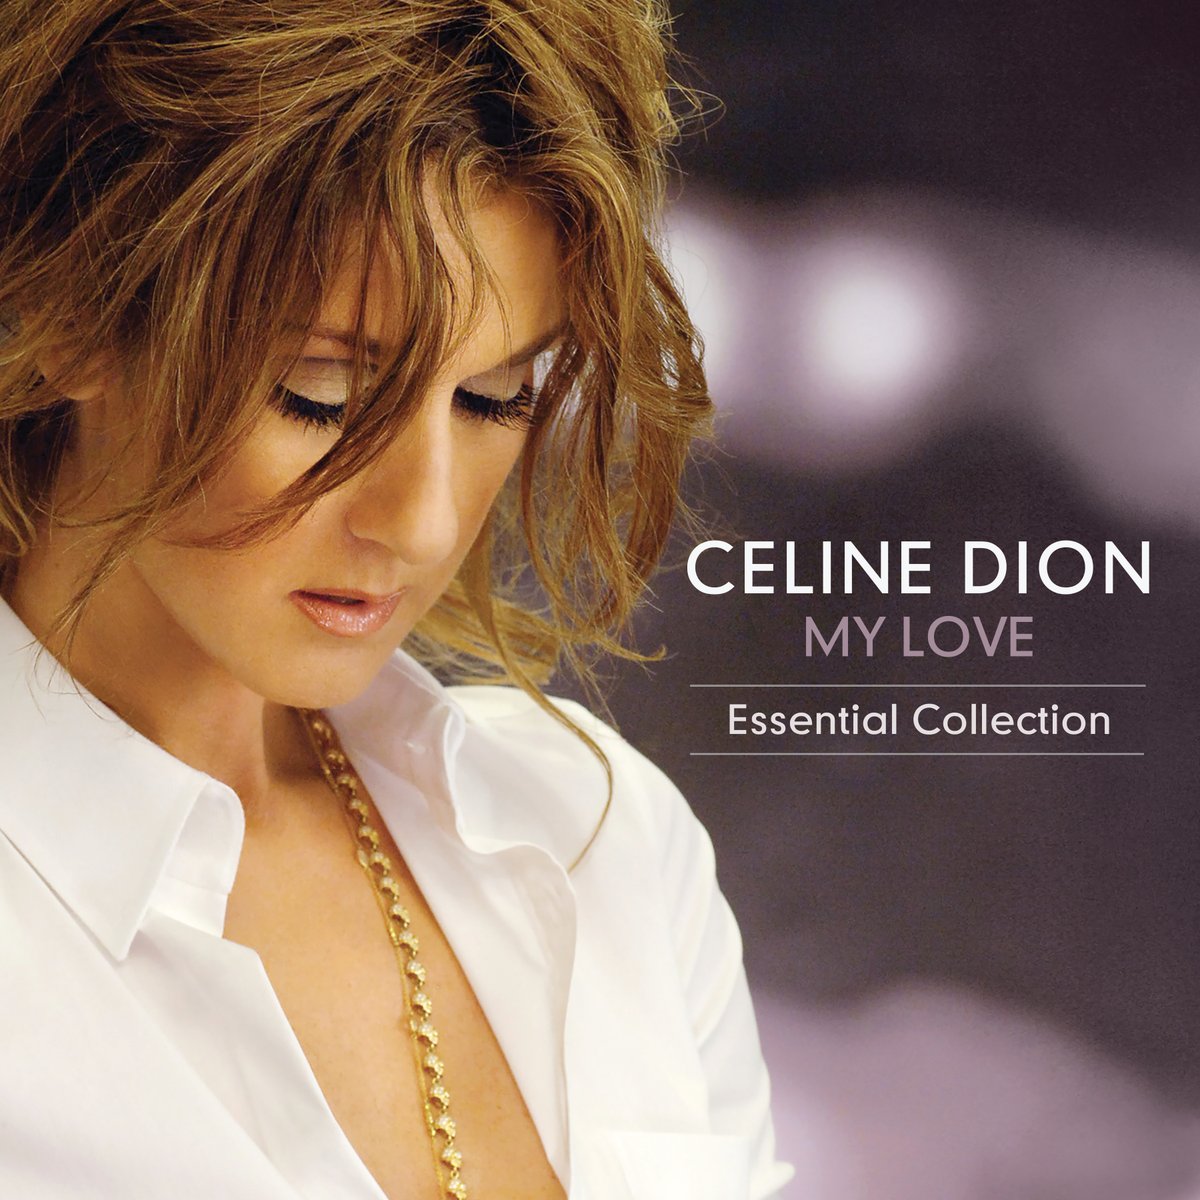 Céline Dion’s ‘My Love: Essential Collection’ is available now for the first time on vinyl ✨ Order your copy here: celinedion.lnk.to/MyLoveOn2LP